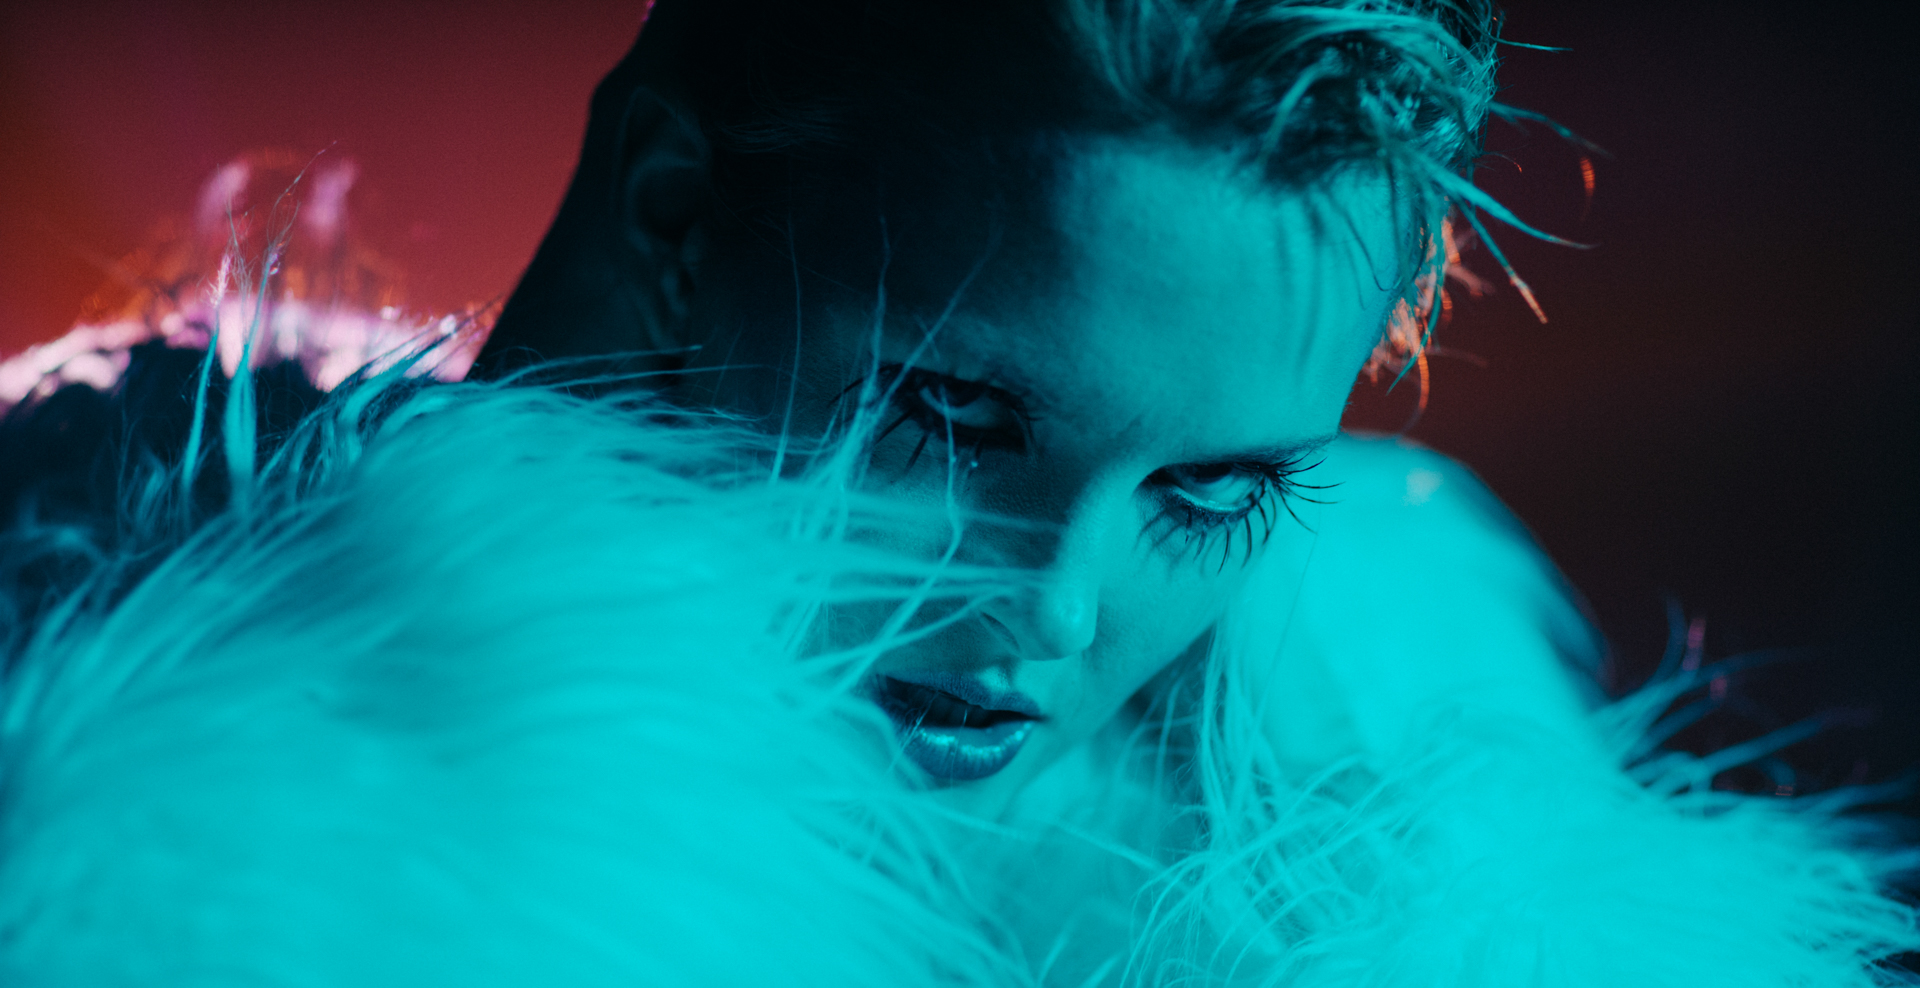 model in teal light stands in front of a red background in a white fur coat